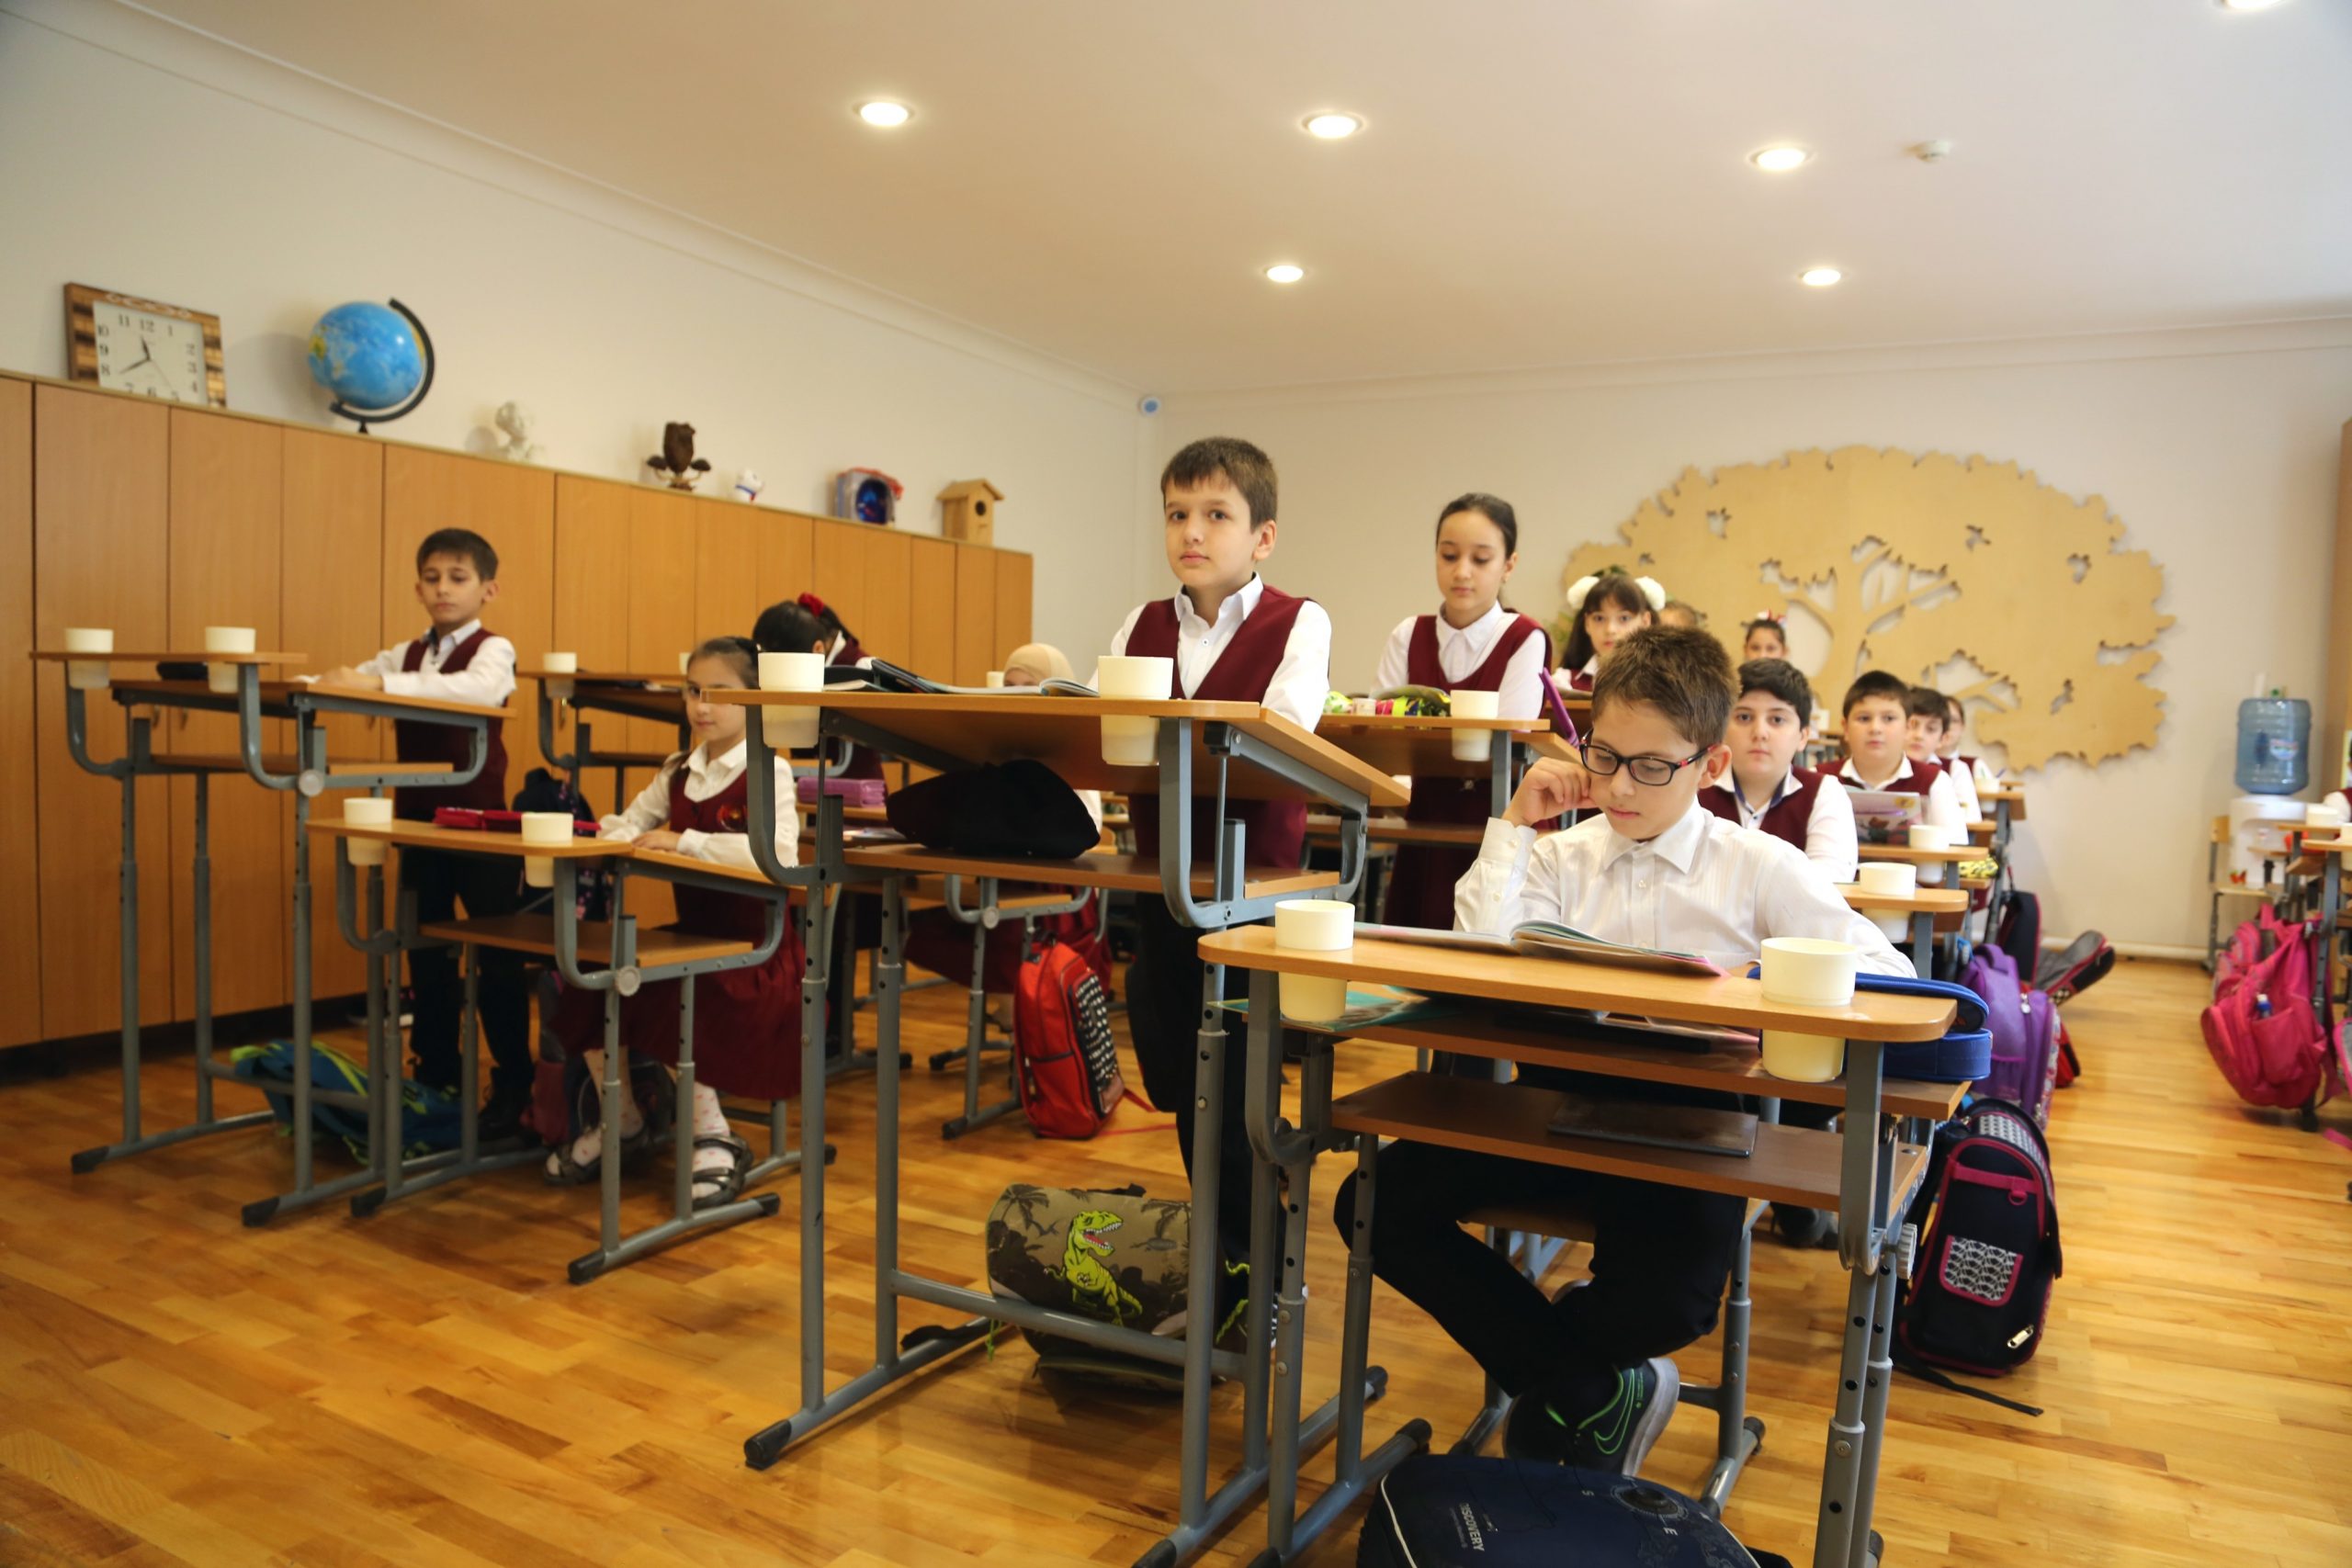 regime of orthograde posture with the use of stand-up desks and small motor activity (ACT)